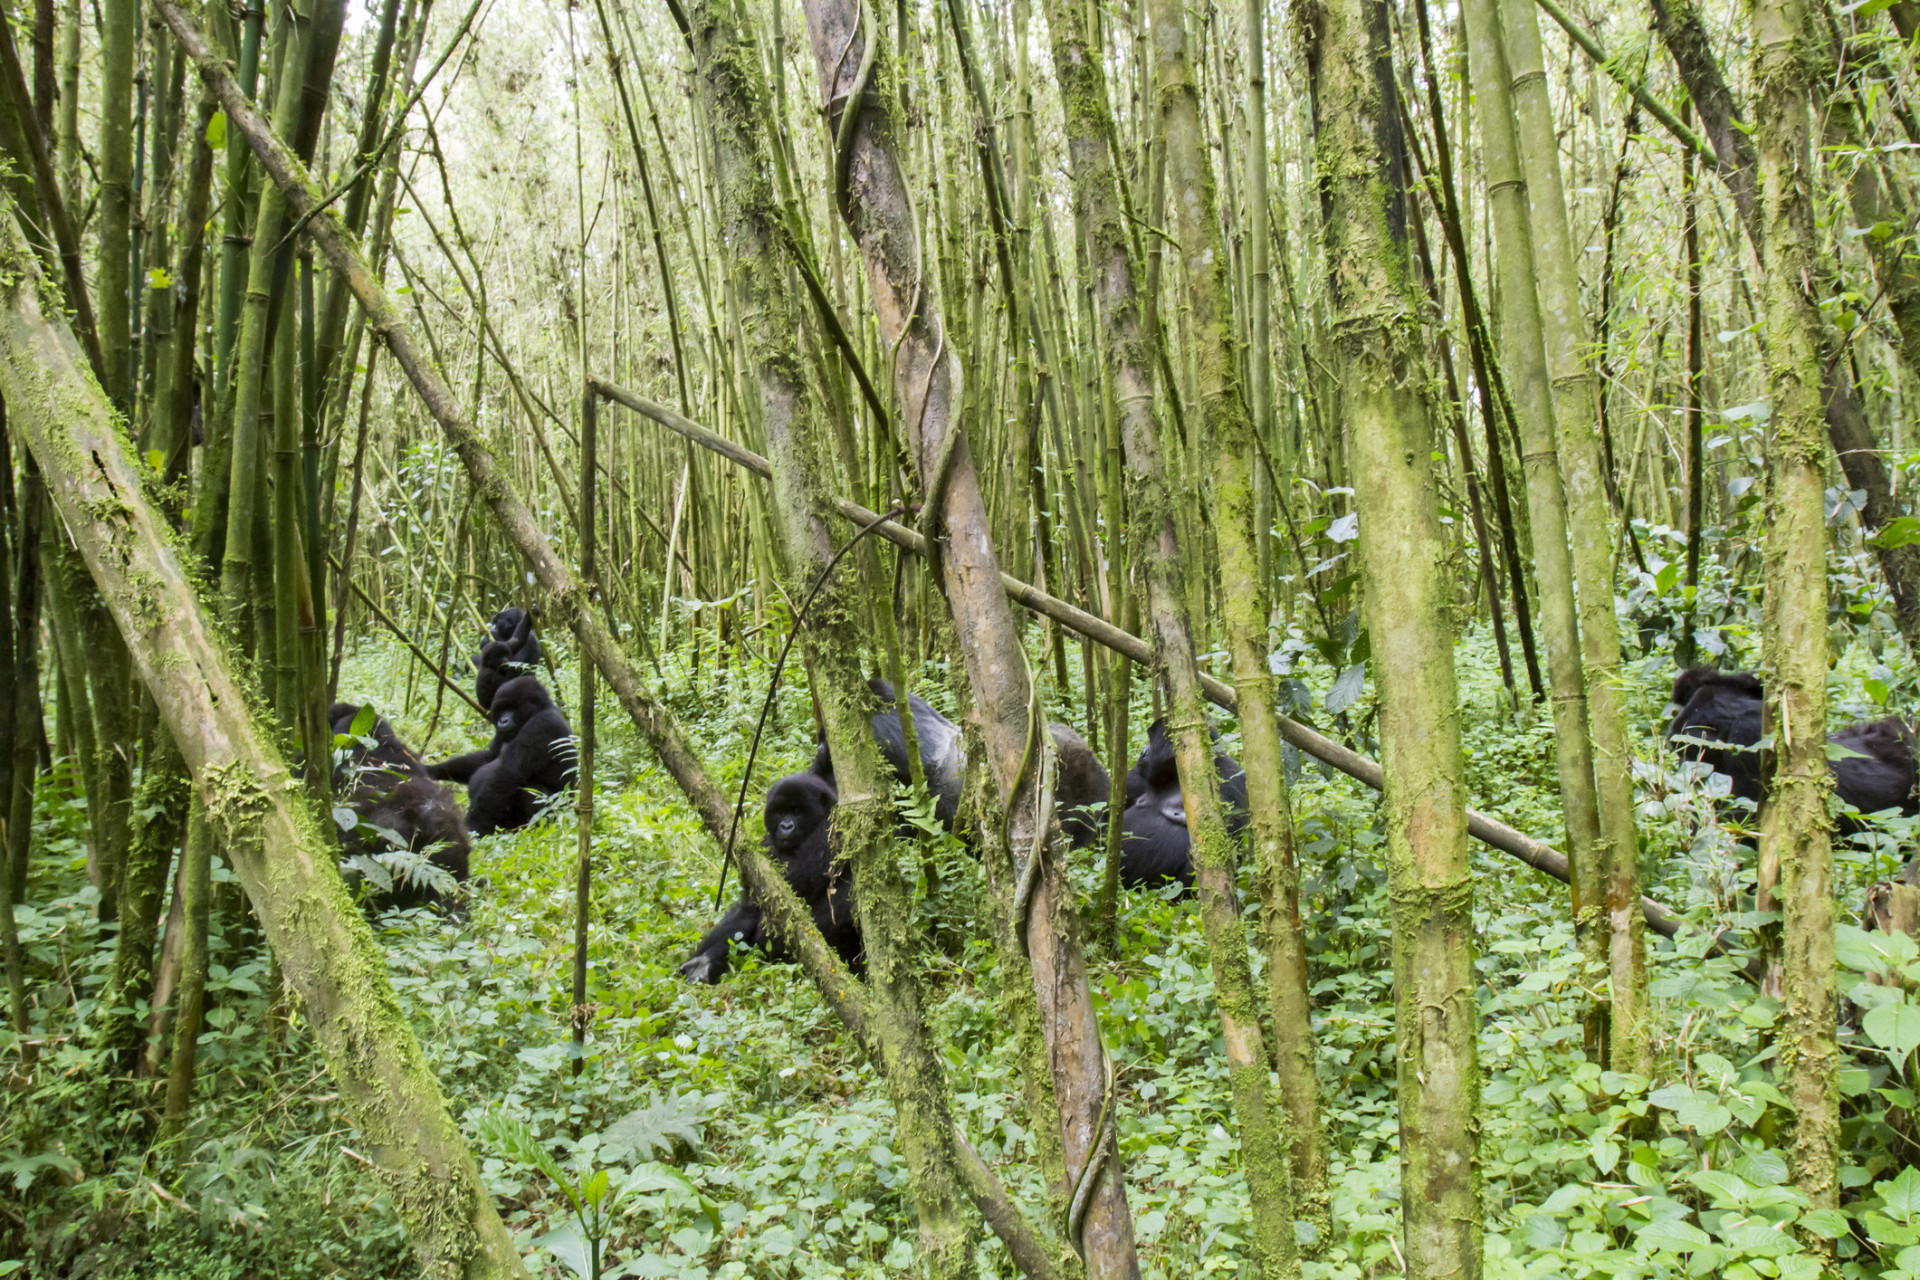 This is the best place to spot mountain gorillas closely in their natural habitat.<p><a href="https://www.msn.com/en-us/community/channel/vid-7xx8mnucu55yw63we9va2gwr7uihbxwc68fxqp25x6tg4ftibpra?cvid=94631541bc0f4f89bfd59158d696ad7e">Follow us and access great exclusive content every day</a></p>